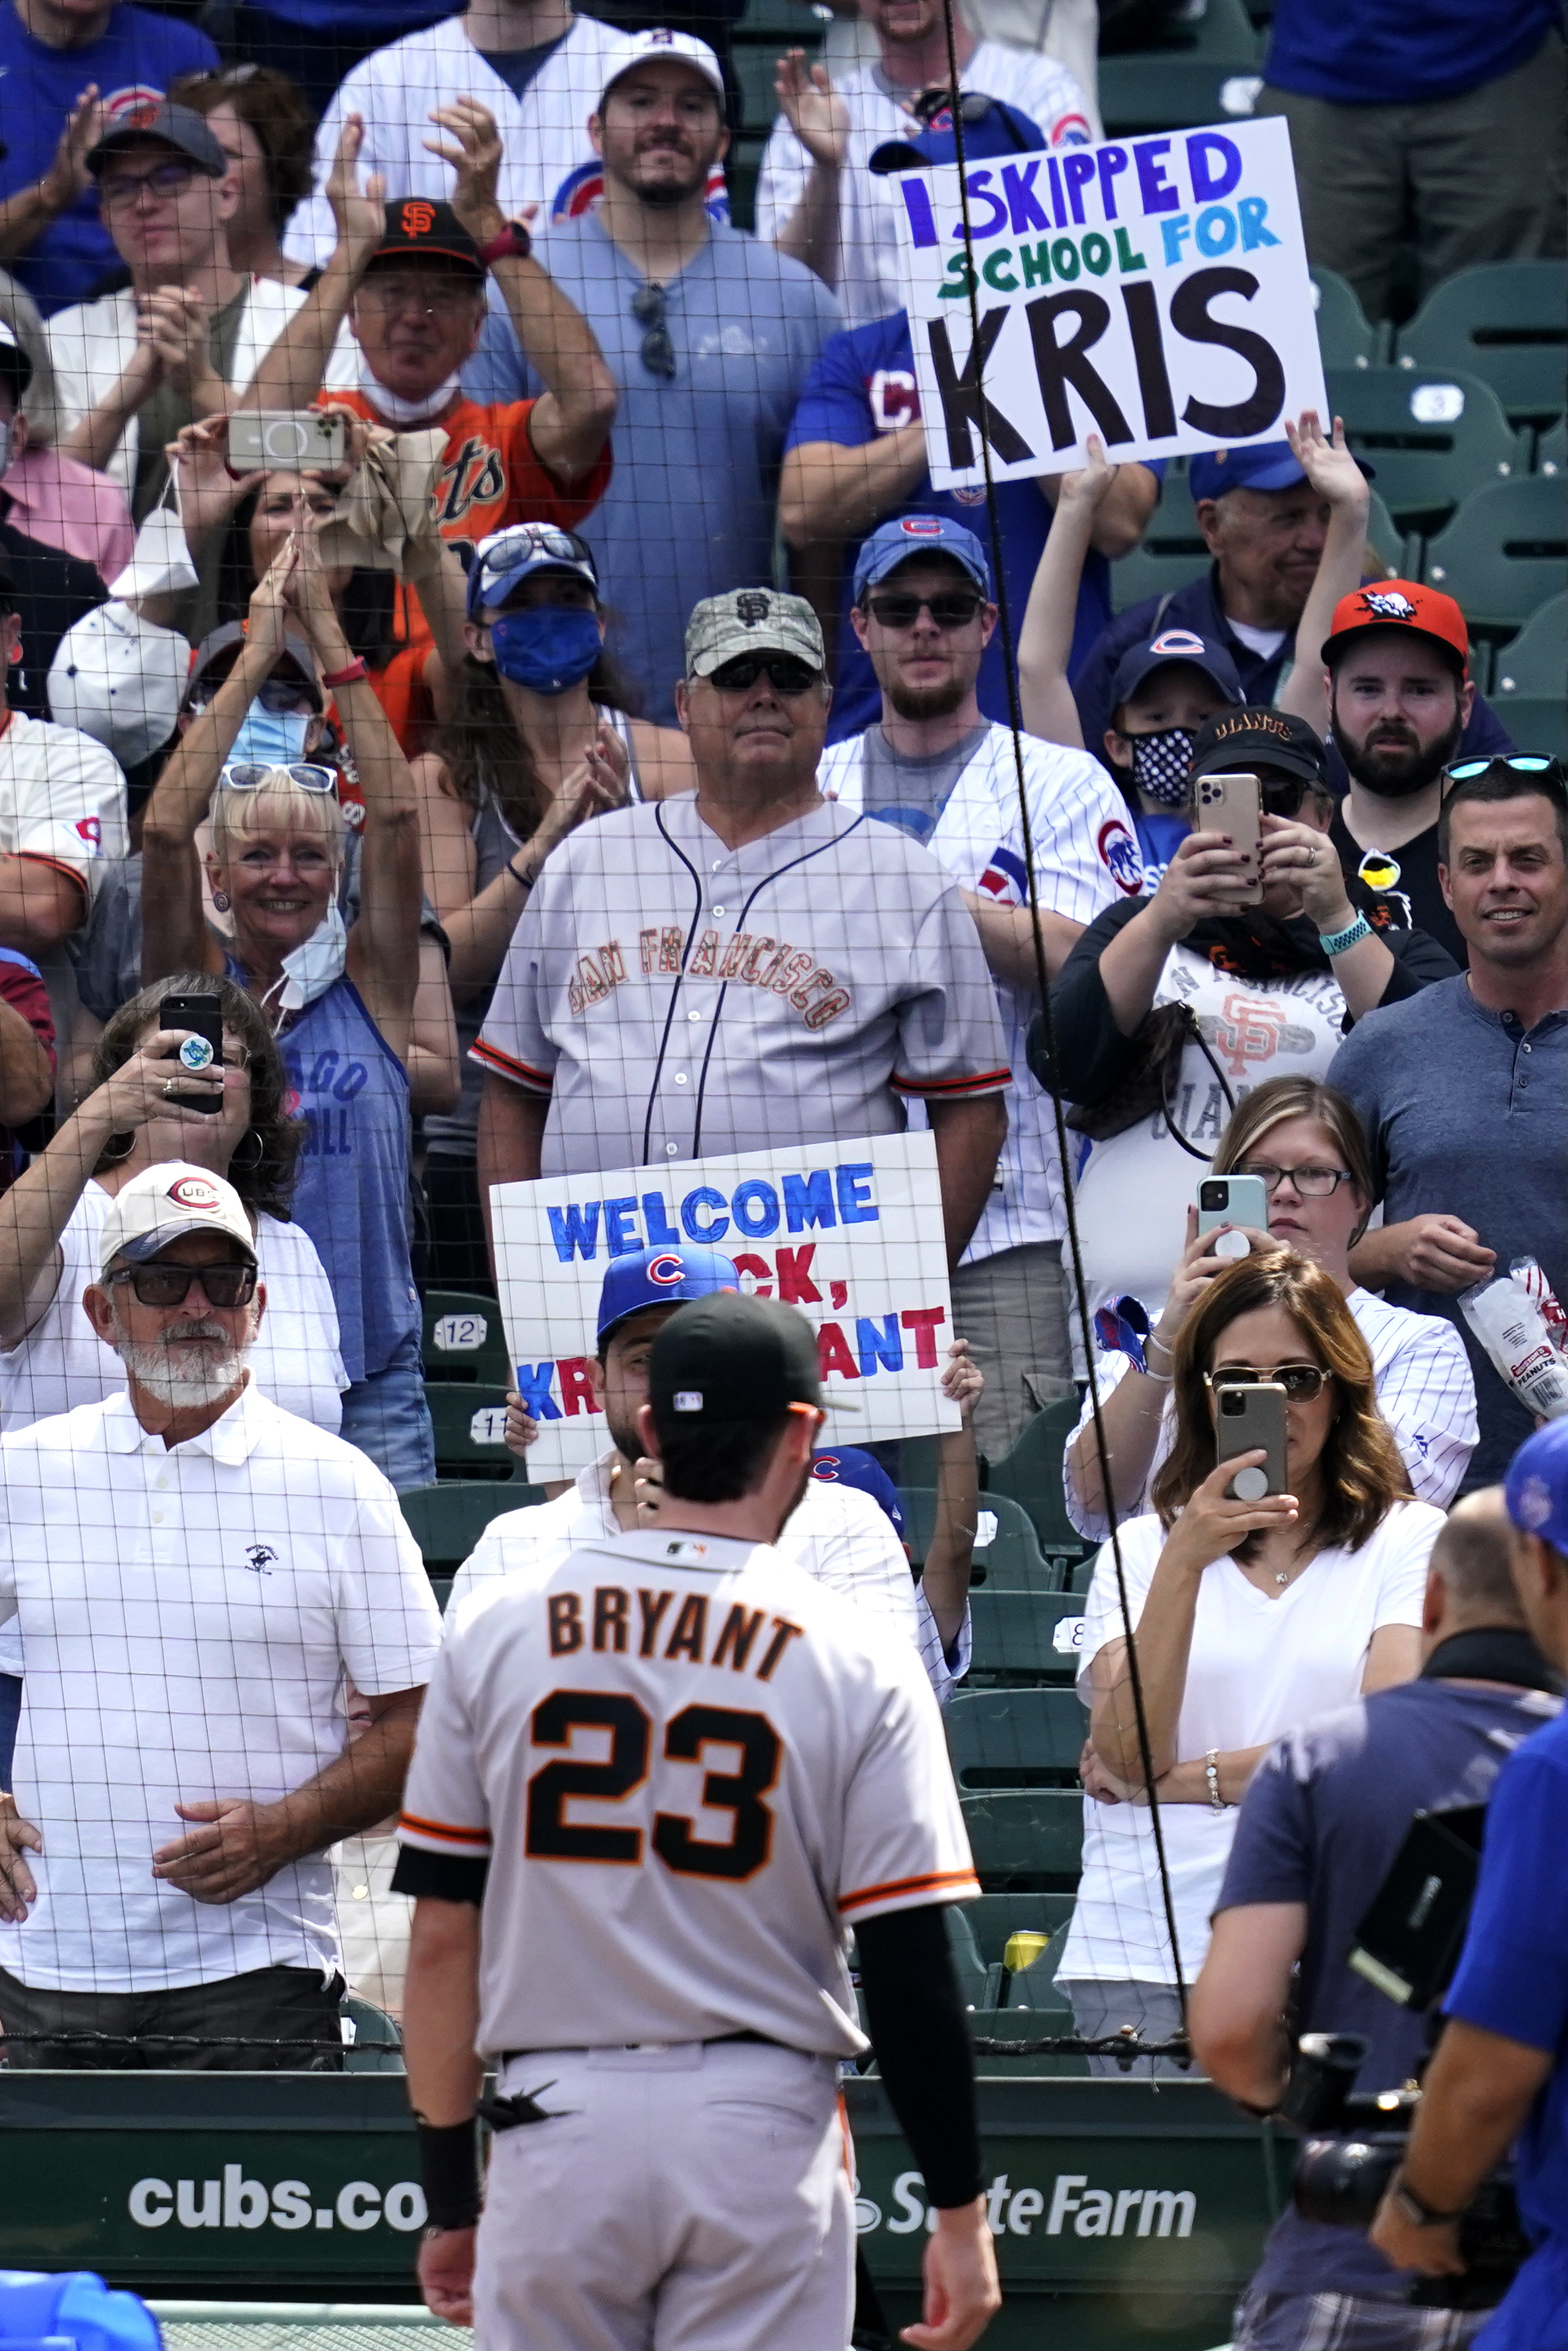 LOOK: Cubs fans pay tribute to Kris Bryant by wearing his jersey at game